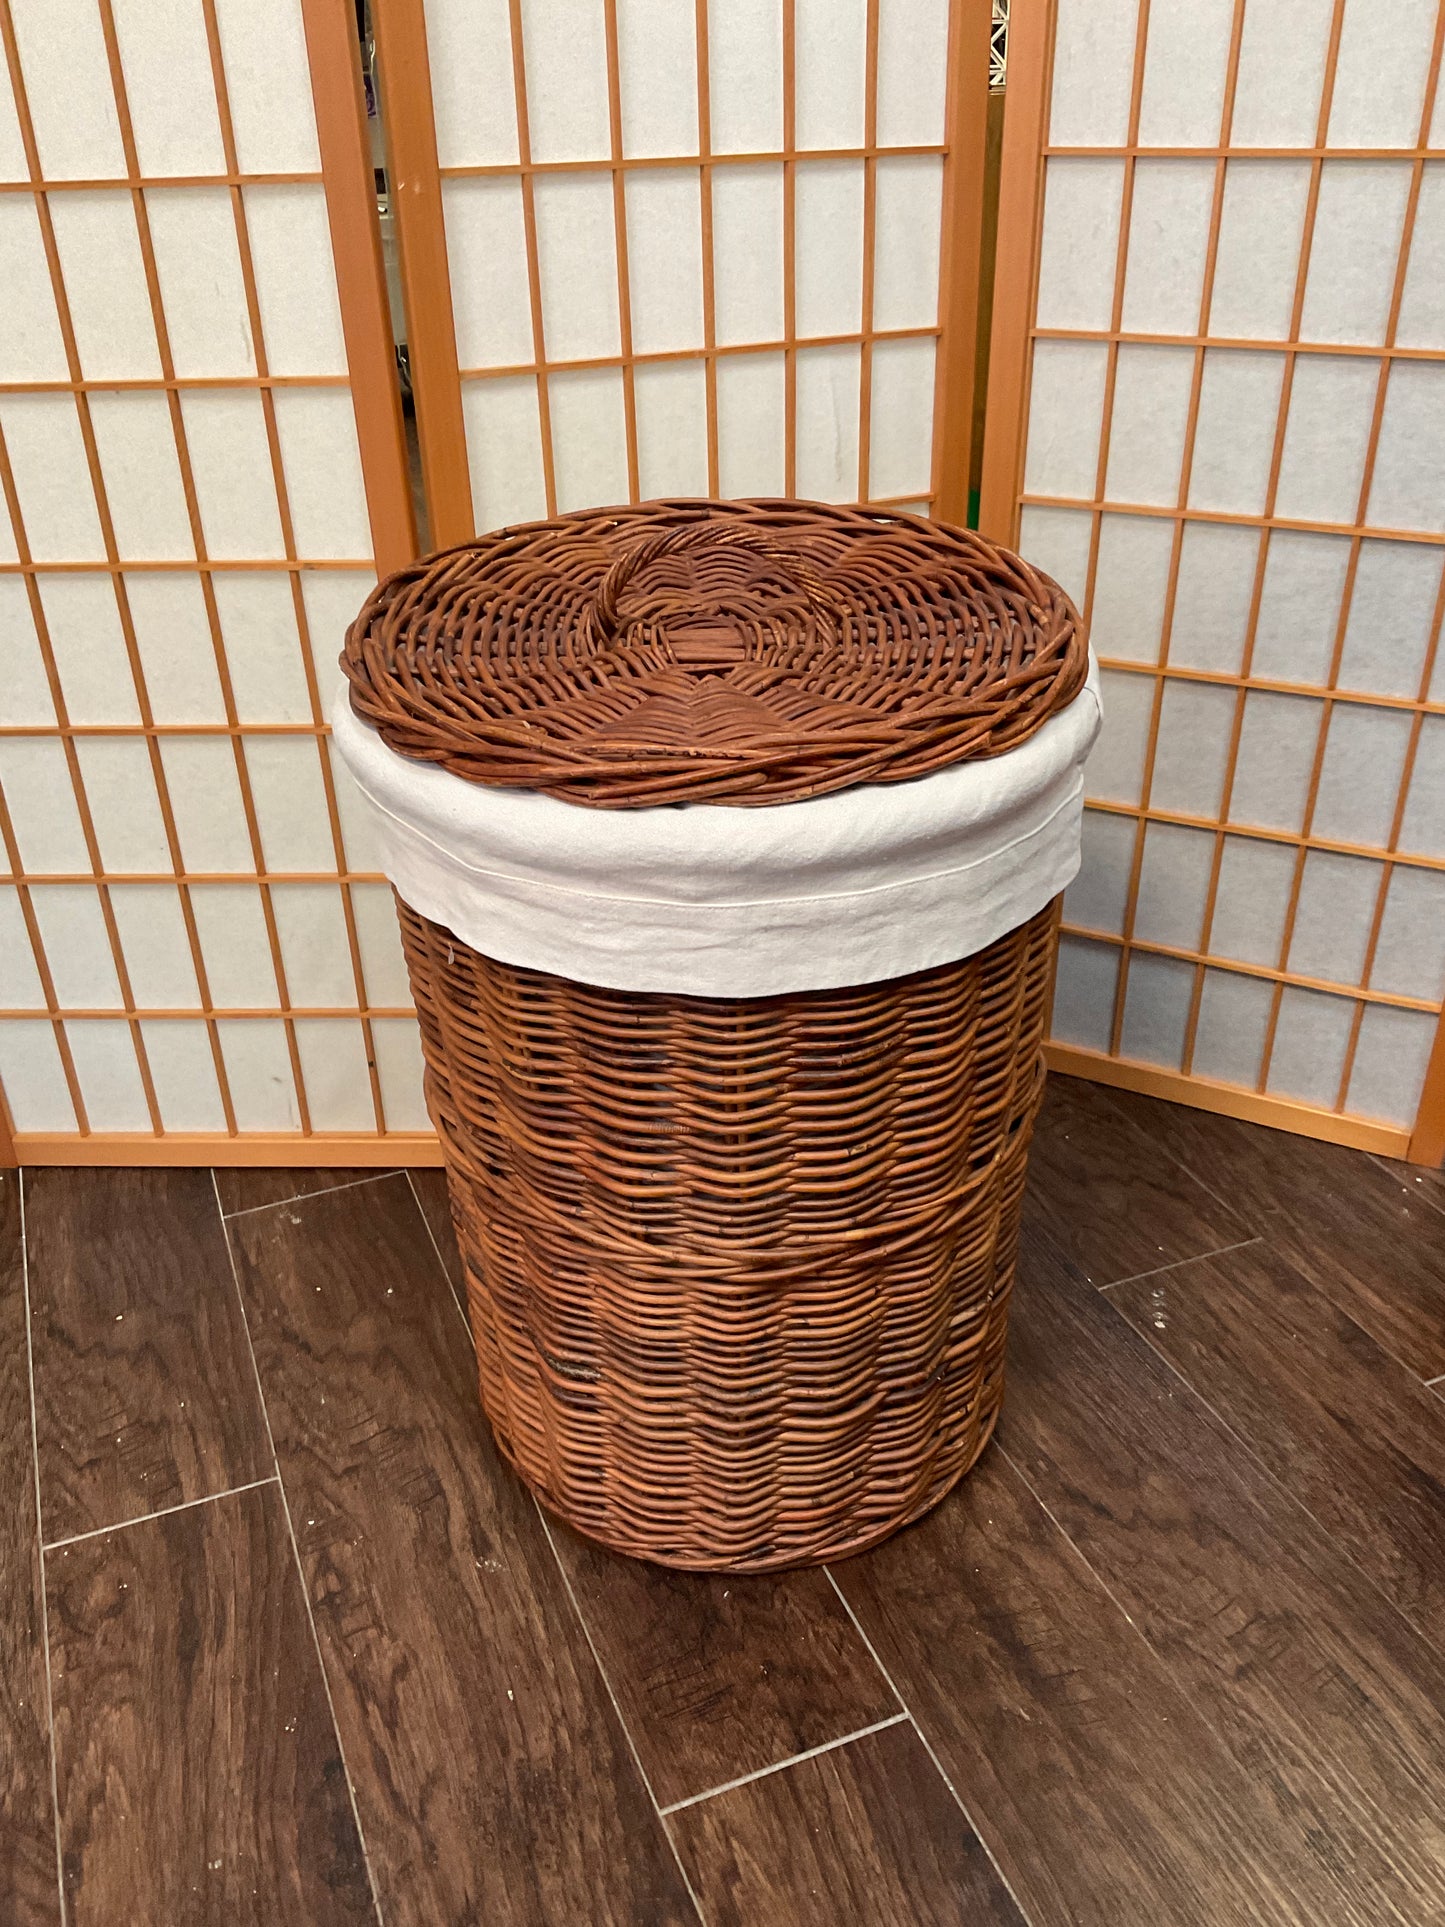 Rattan Laundry Basket, Lined